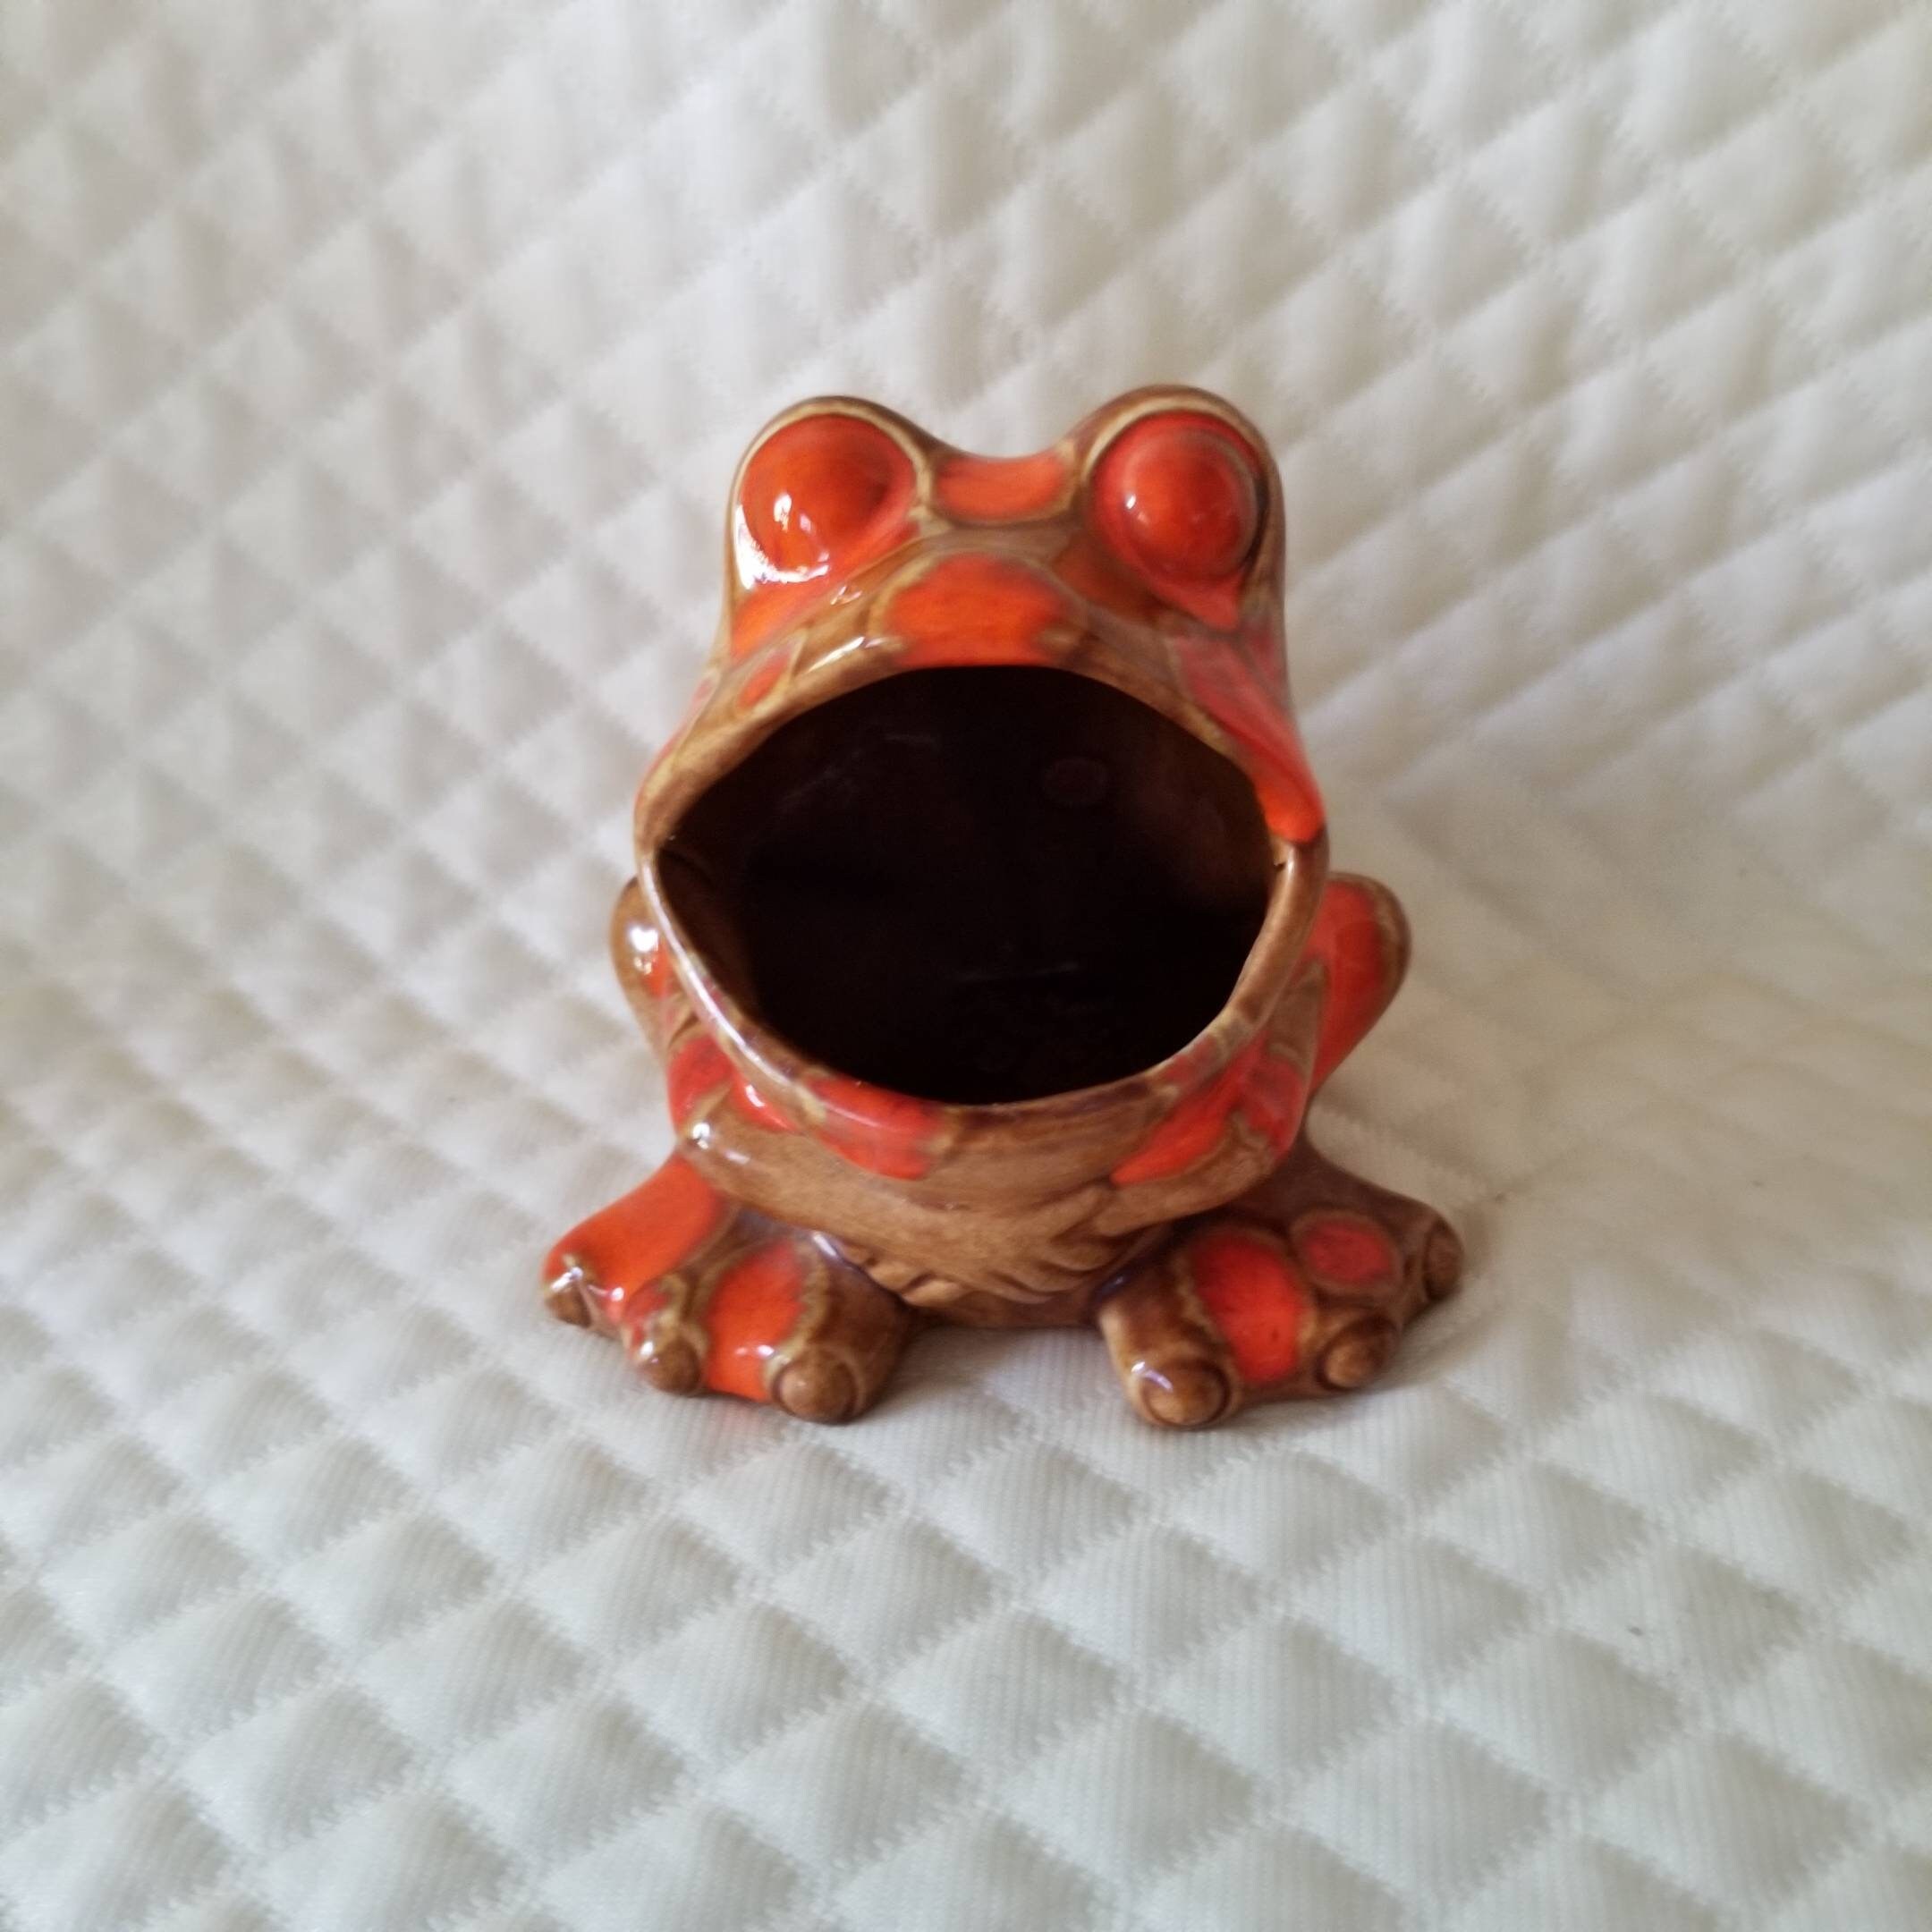 Frog, catch all, toad, sponge holder, Jewelry holder, Happy Froggy, Ceramic  Bisq